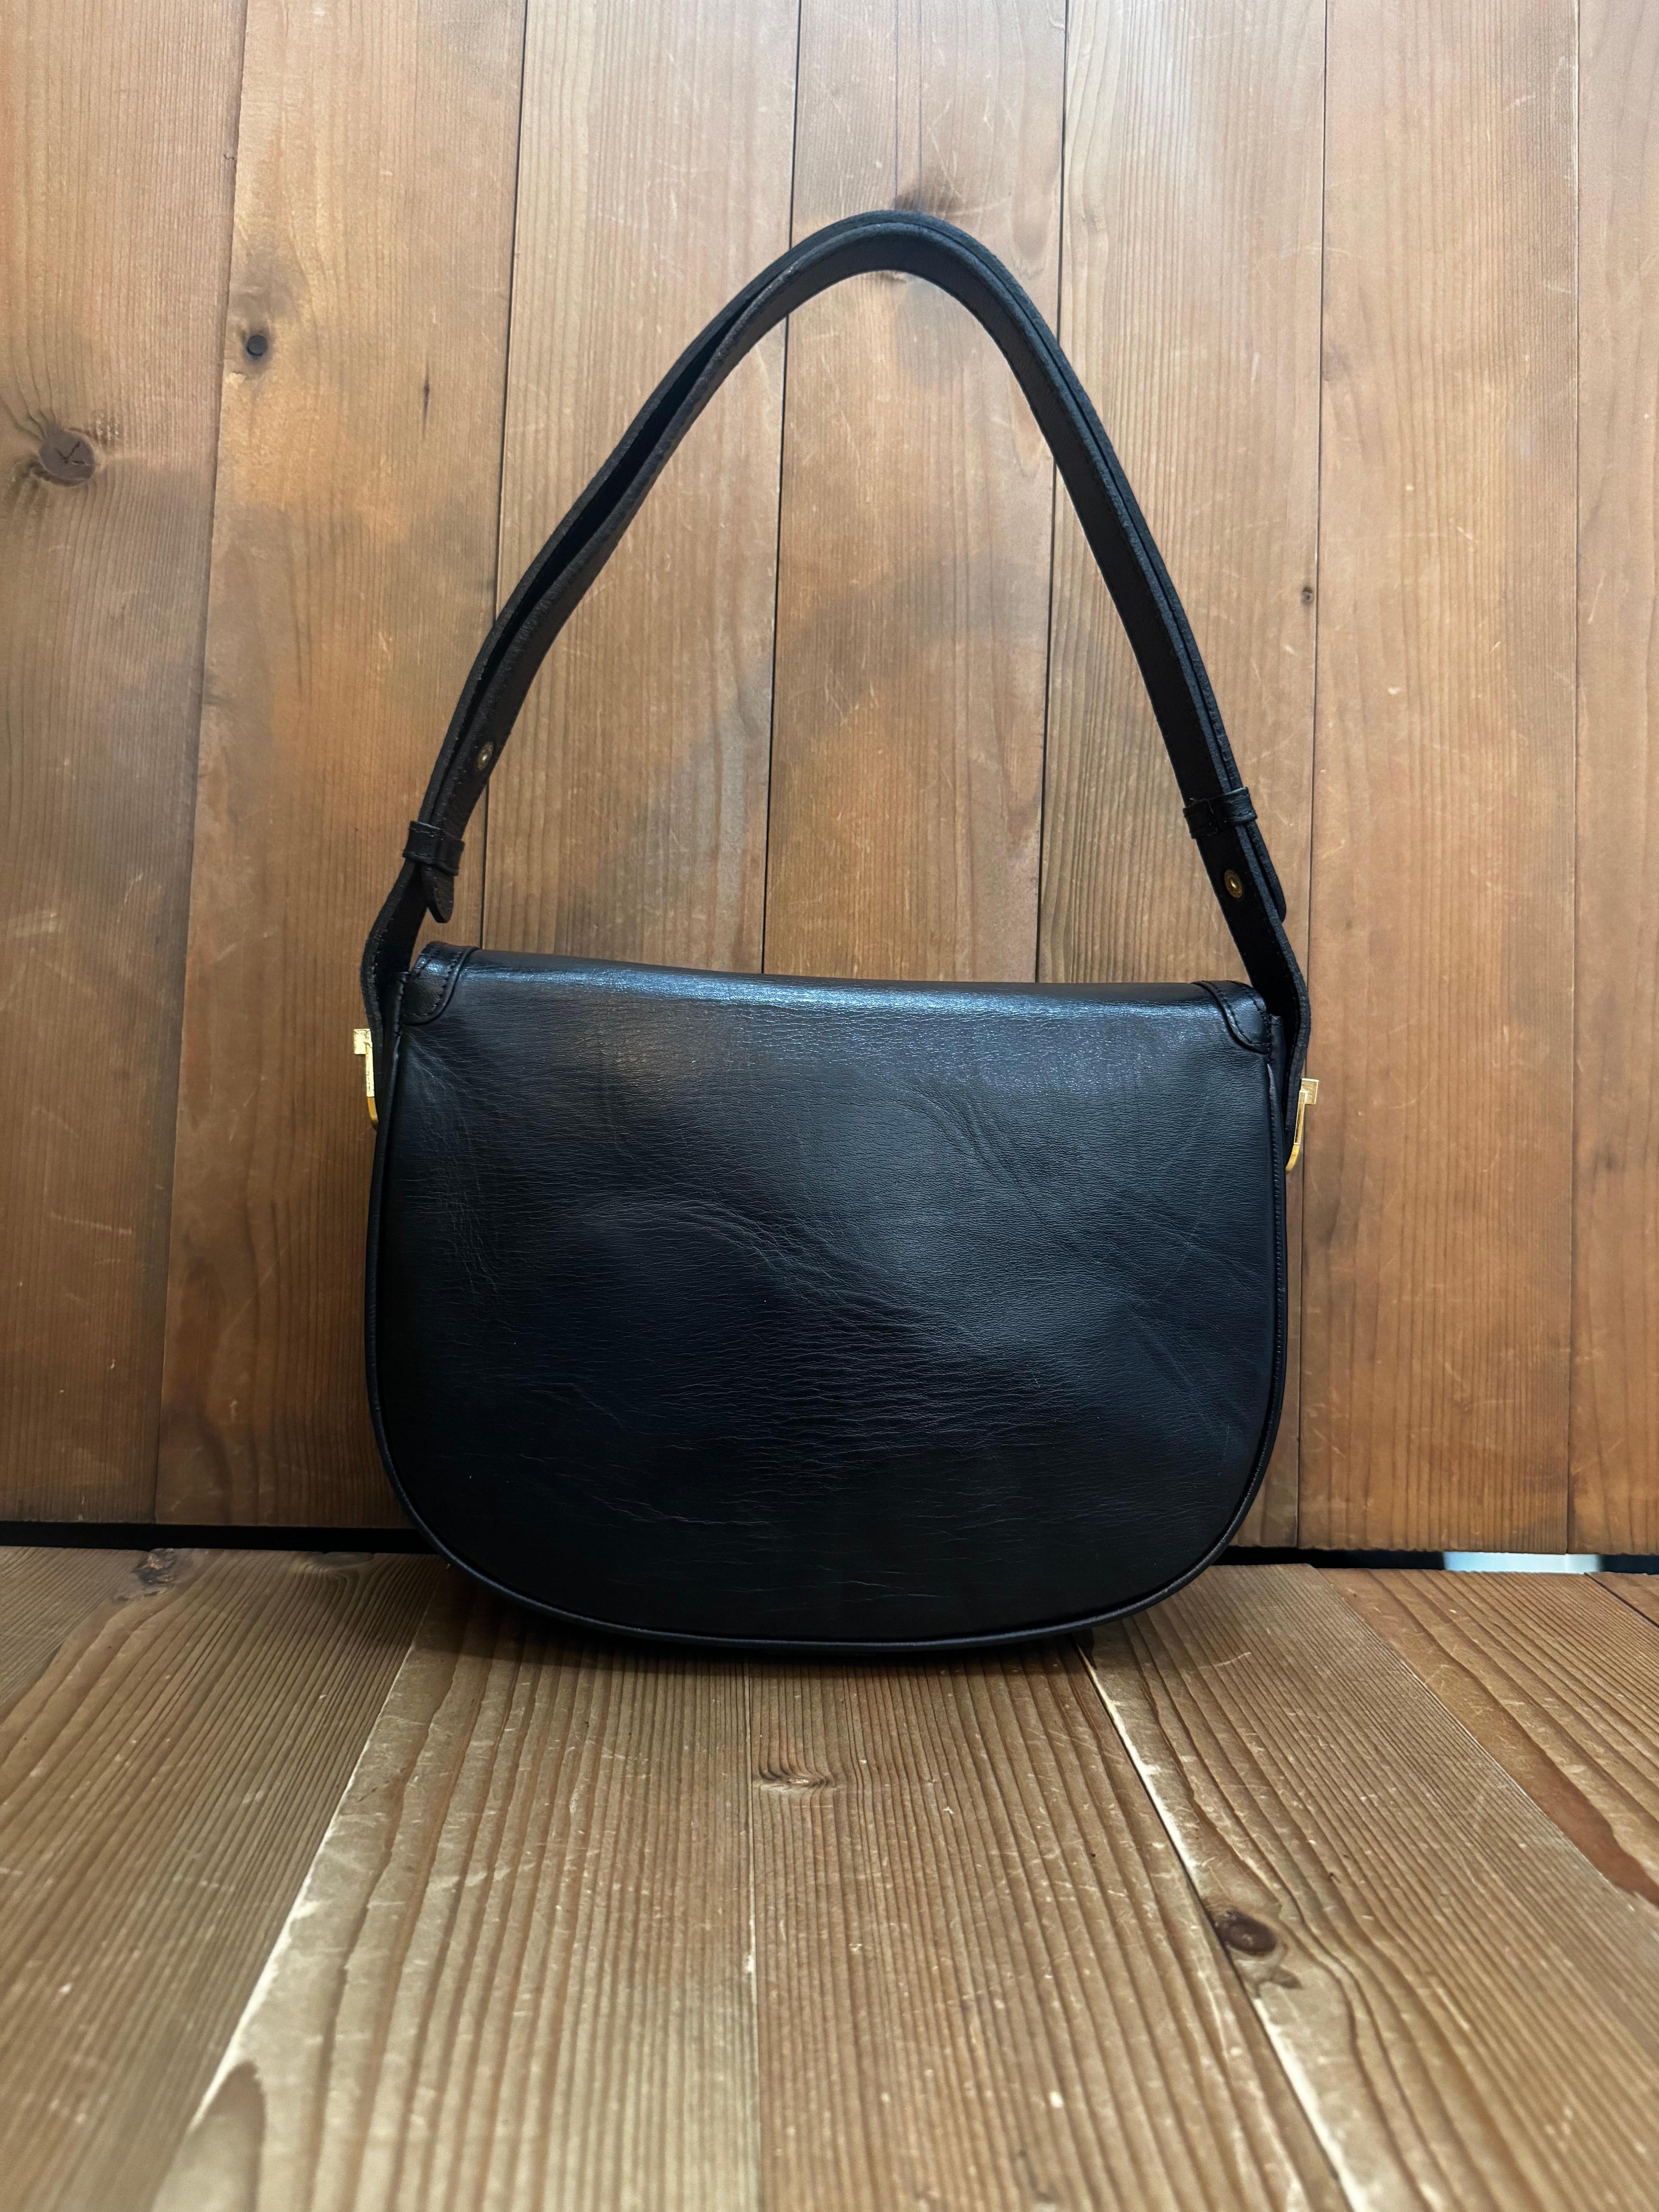 This Vintage GUCCI shoulder bag is crafted of calfskin leather in black featuring gold toned hardware. Front snap flap closure opens to a fabric interior featuring a zippered pocket and a patch pocket. Made in Italy. Measures approximately 10 x 8 x